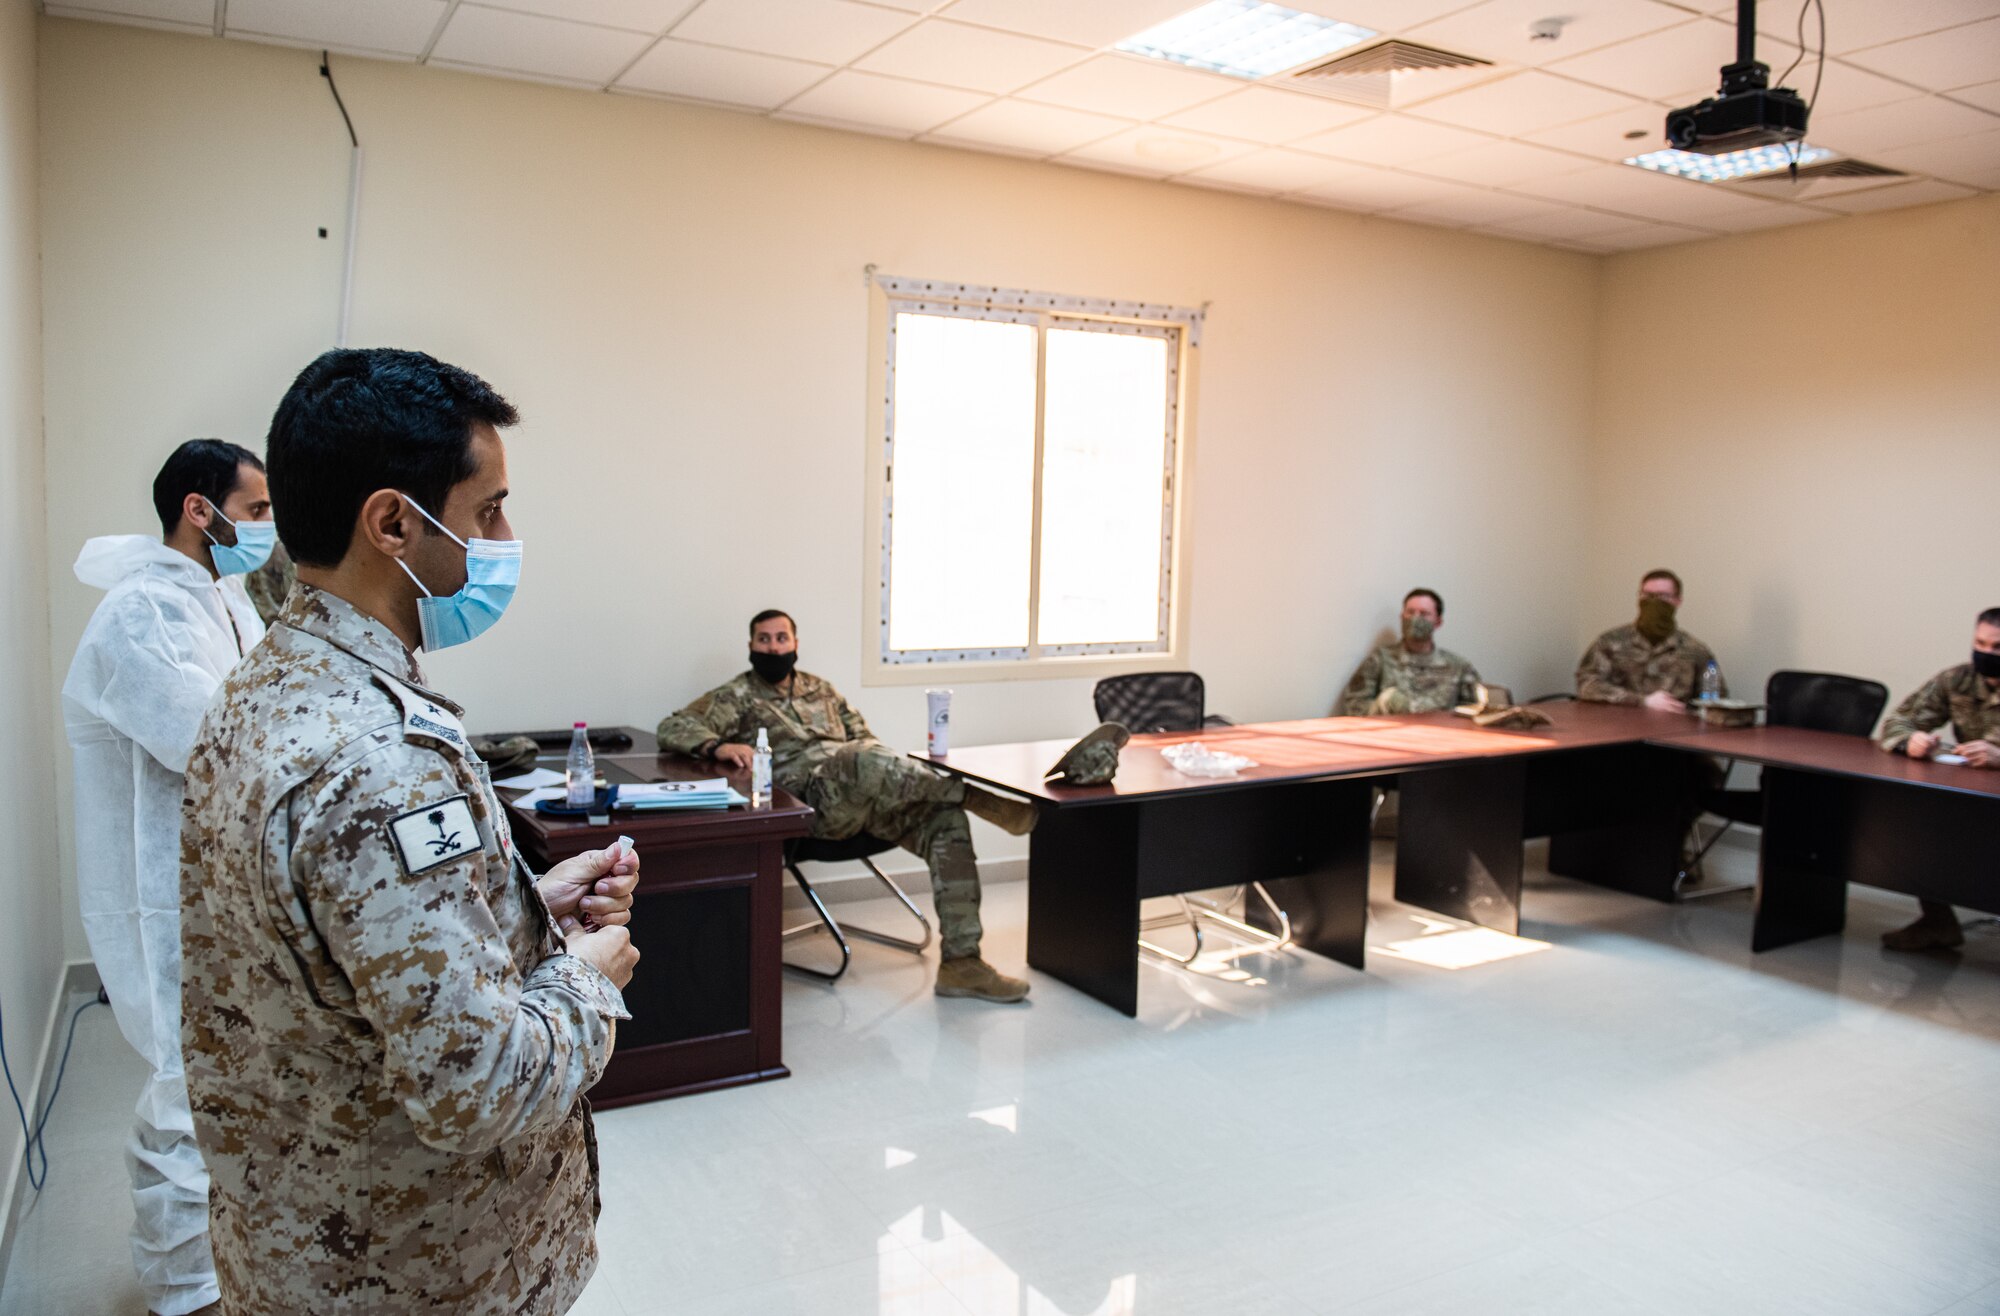 Airmen from the 378th Expeditionary Civil Engineer Squadron emergency management flight and Royal Saudi Air Force personnel shared experience and expertise during a hazardous materials response exercise Dec. 12, 2020, at Prince Sultan Air Base, Kingdom of Saudi Arabia.